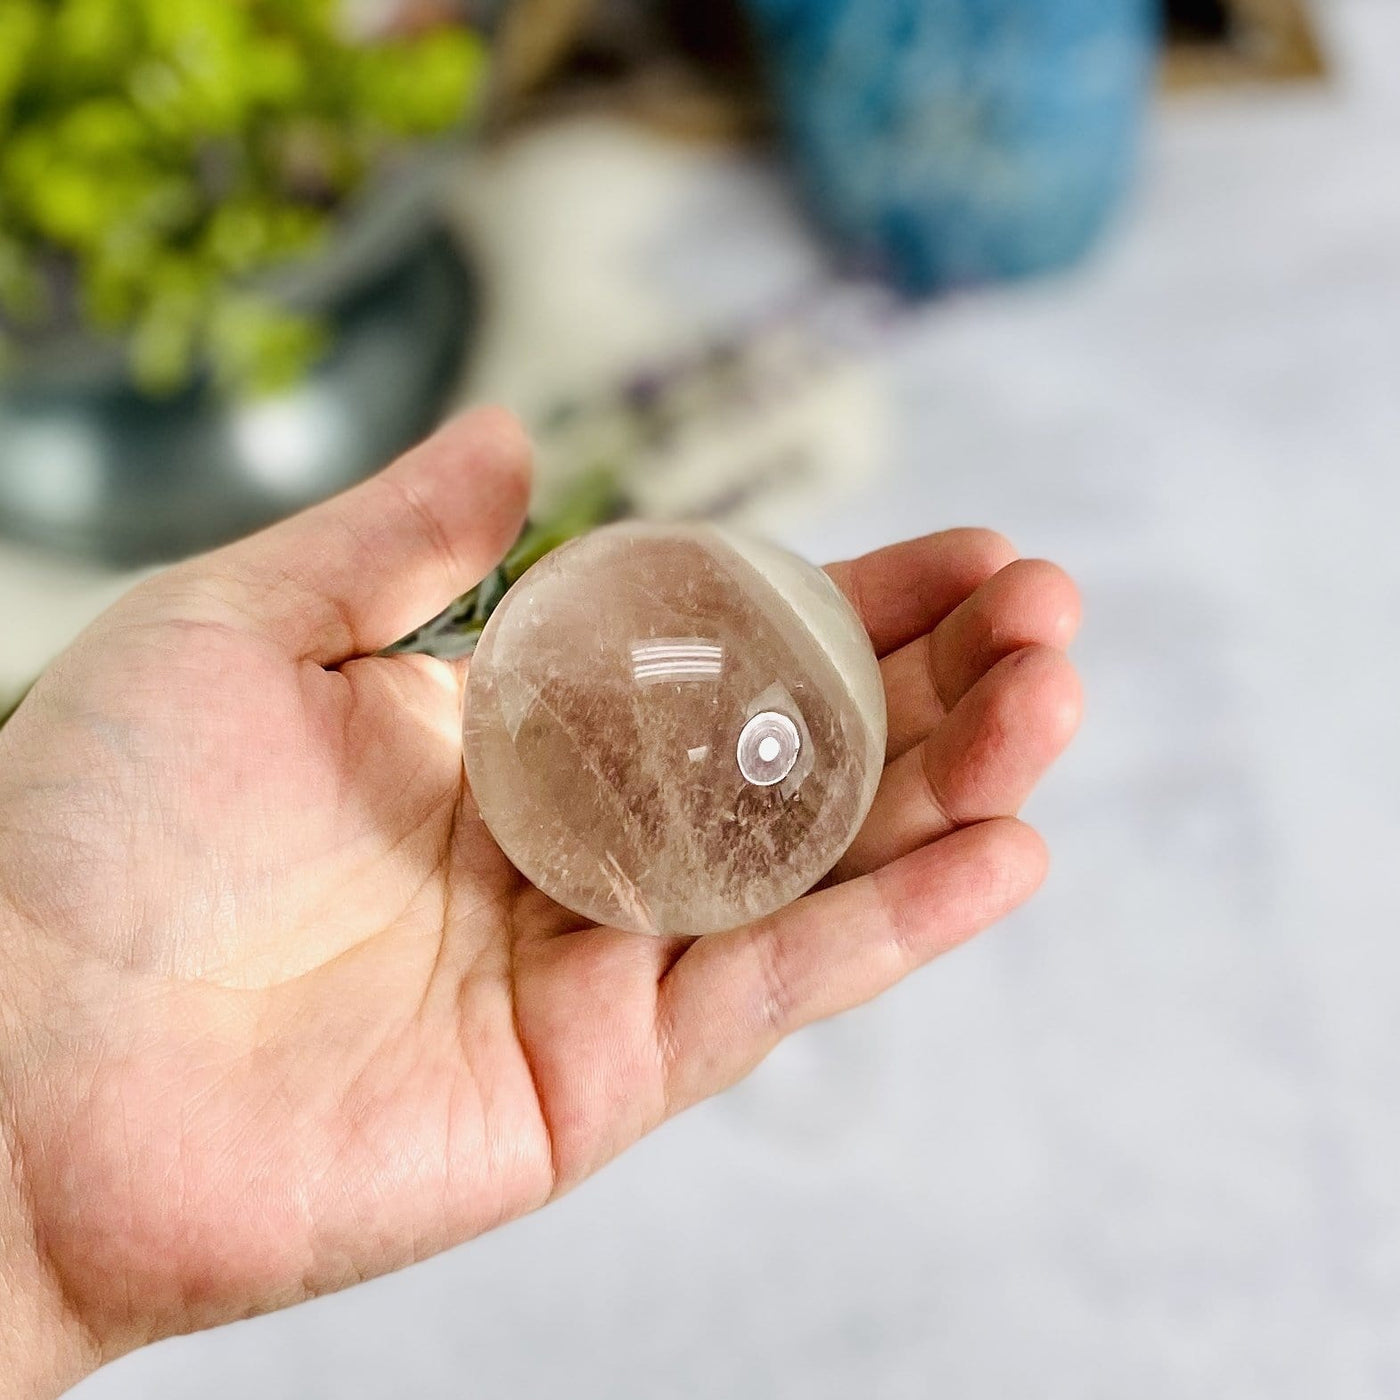 hand holding up Crystal Quartz Polished Sphere with decorations blurred in the background